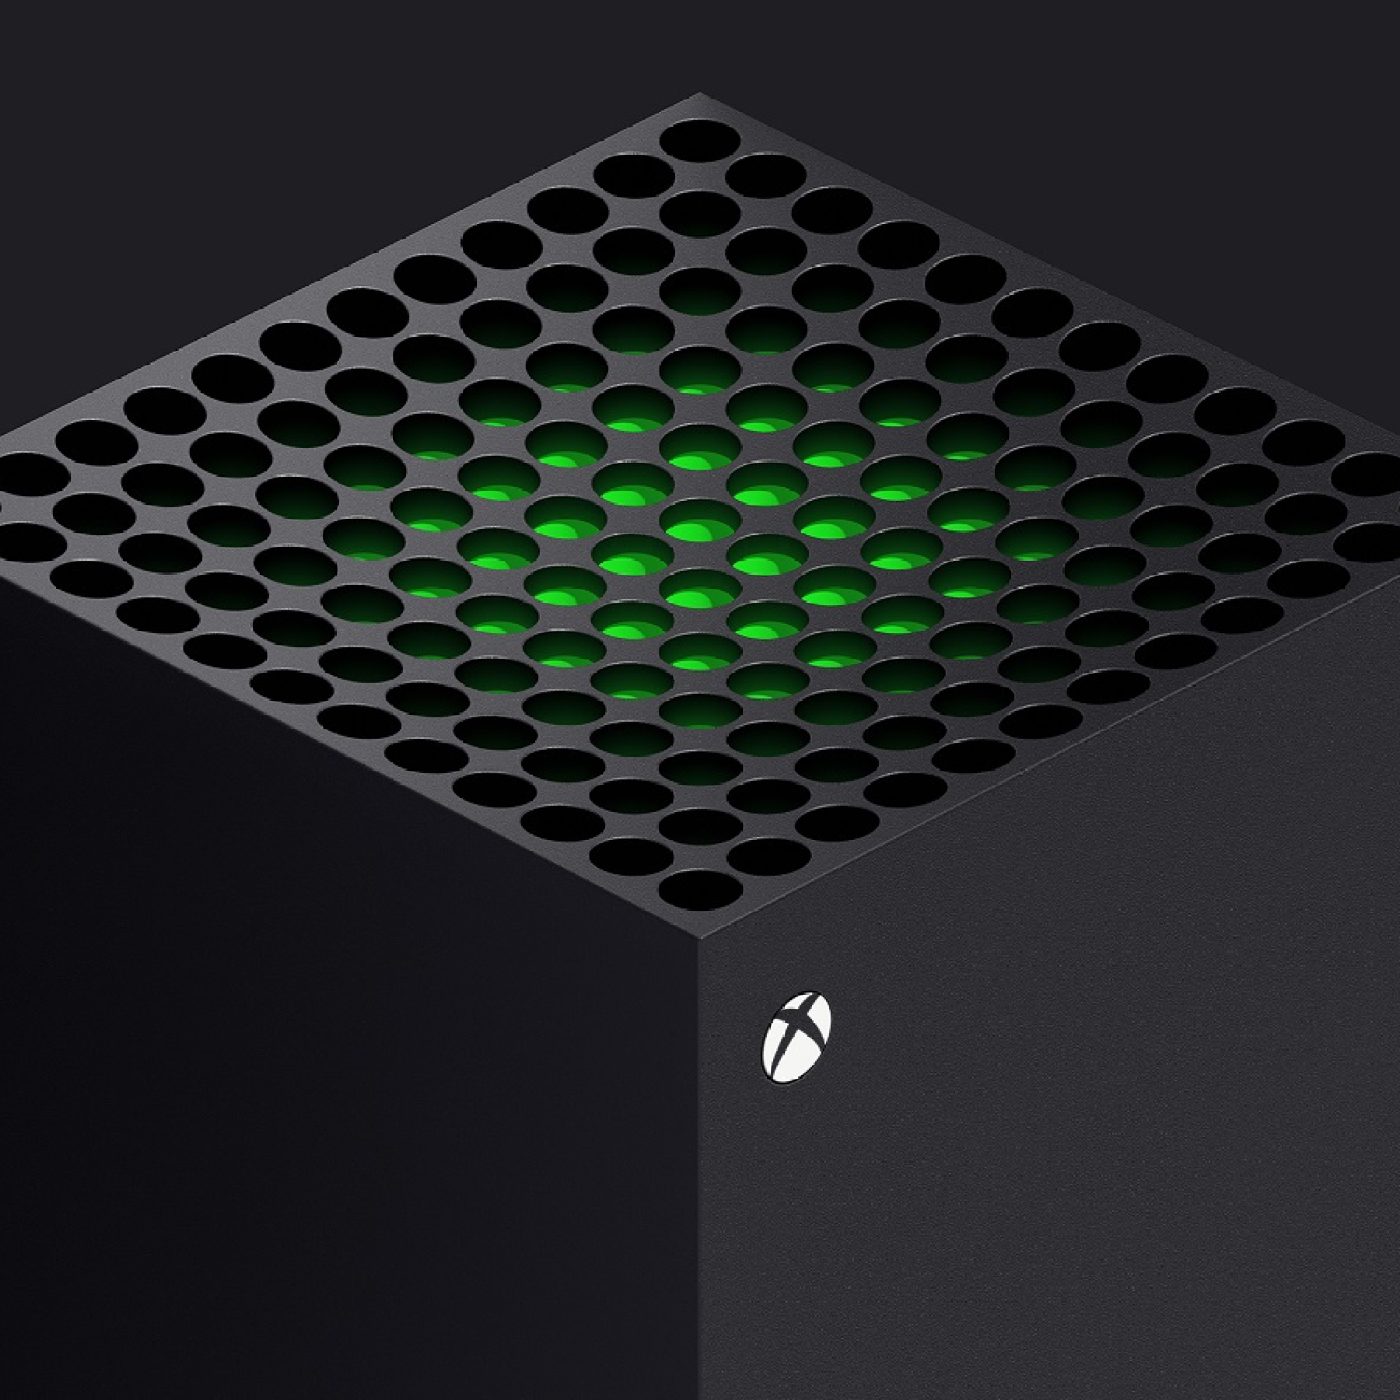 Microsoft Confirms No Price Increase for Xbox Series X and S - IGN